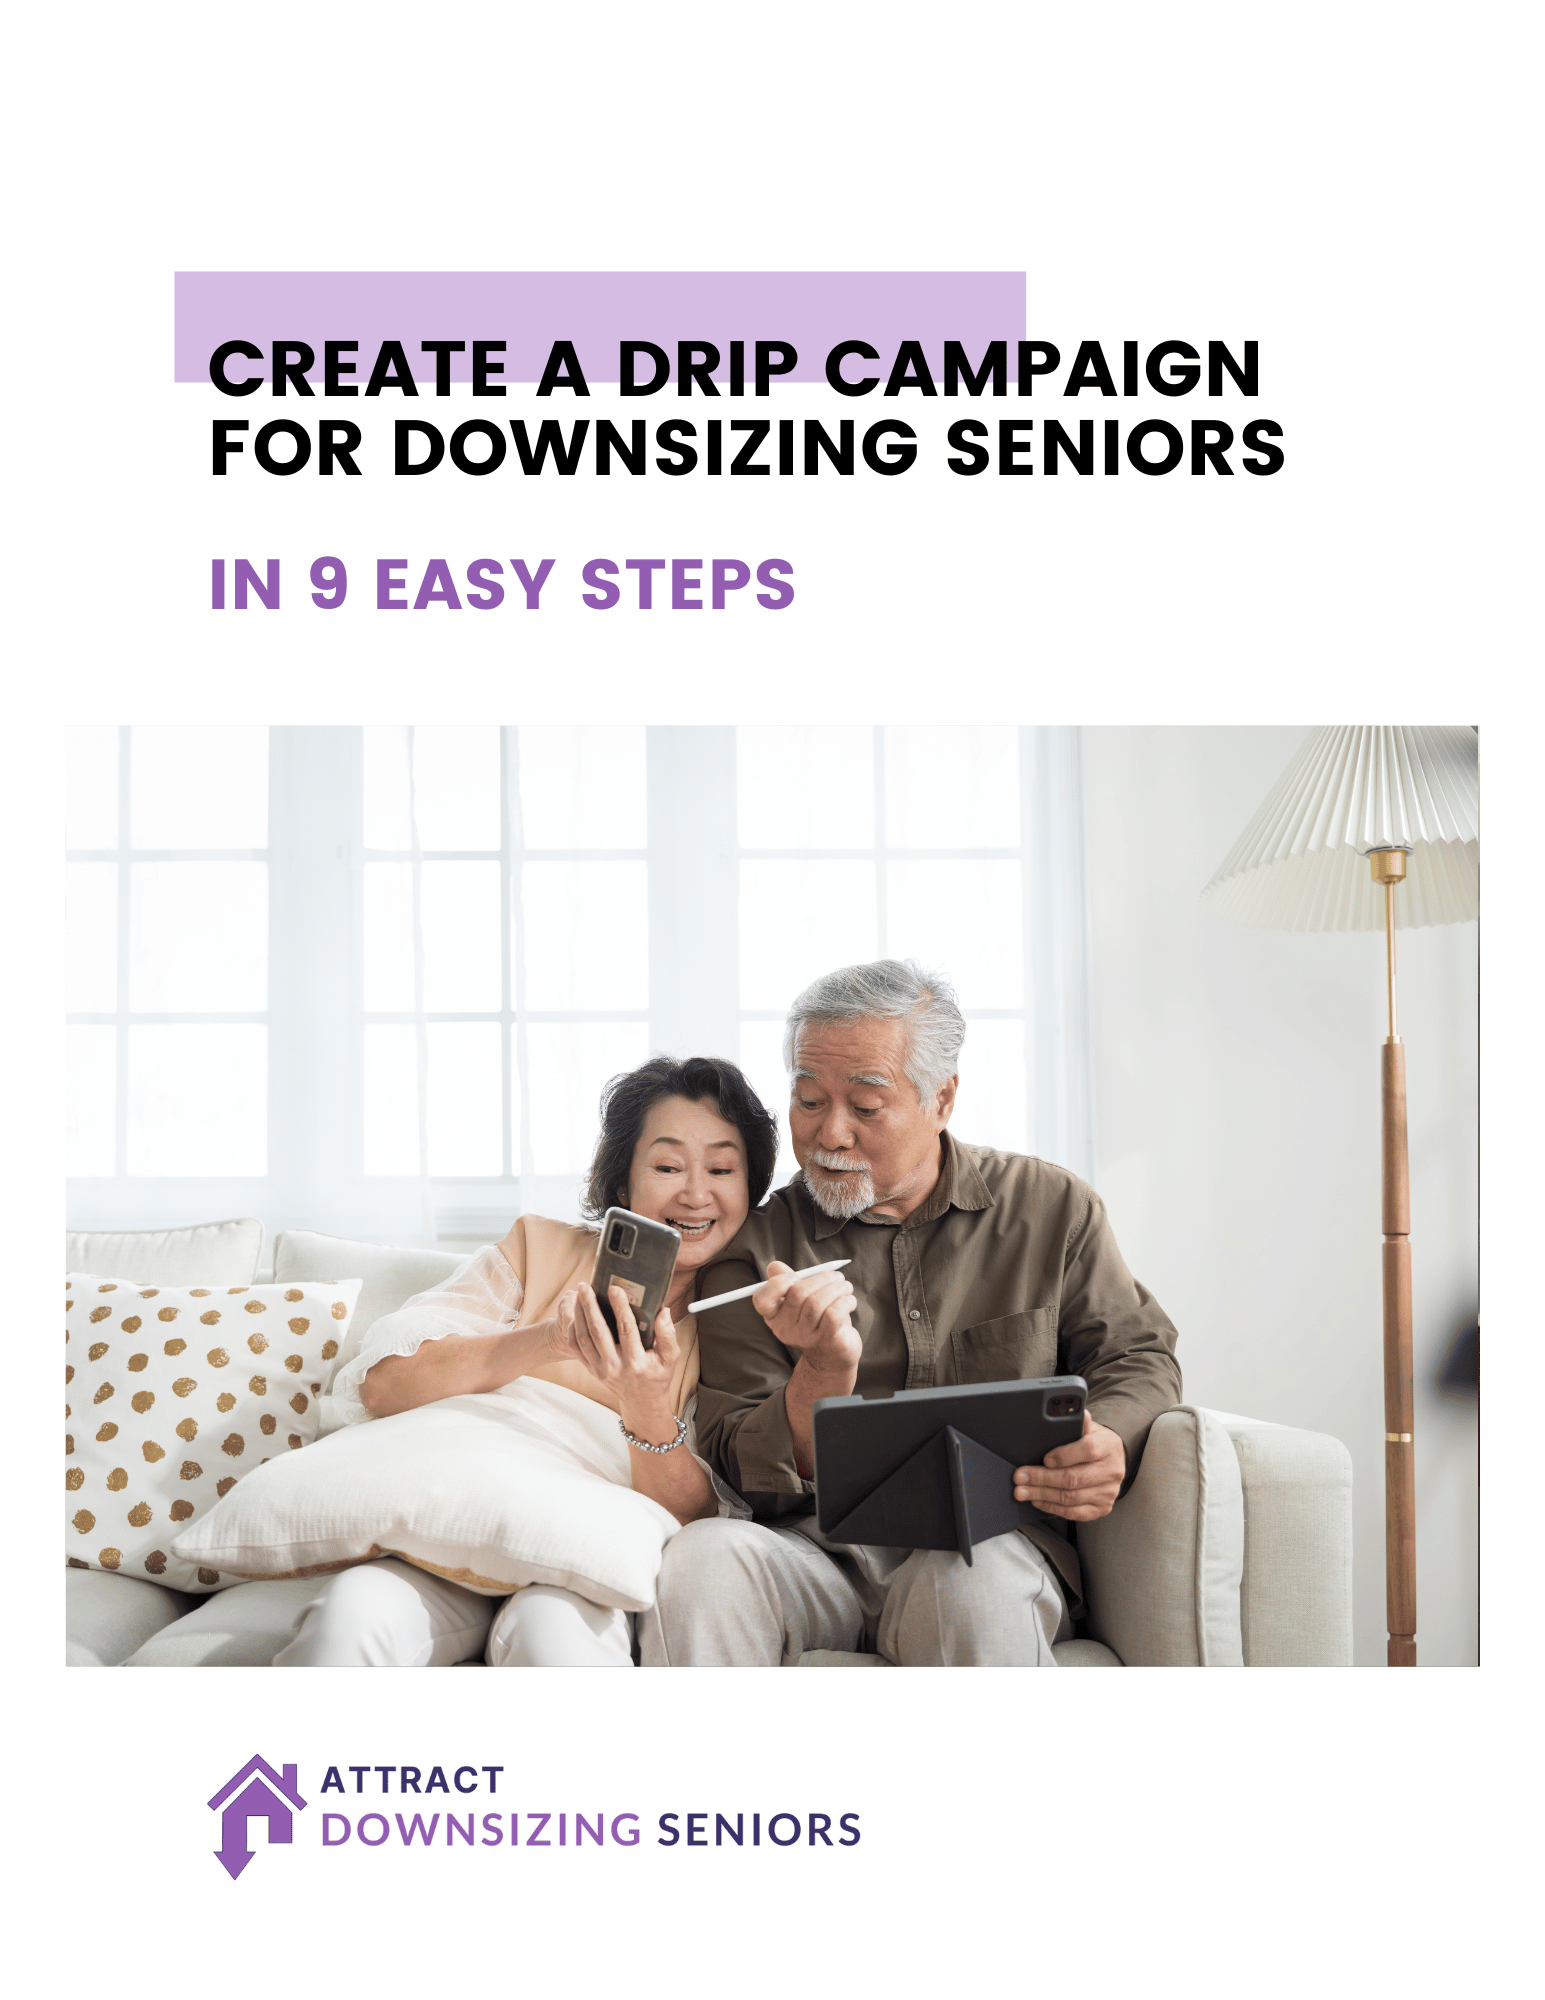 Create a drip campaign for downsizing seniors in 9 easy steps - ebook - real estate marketing